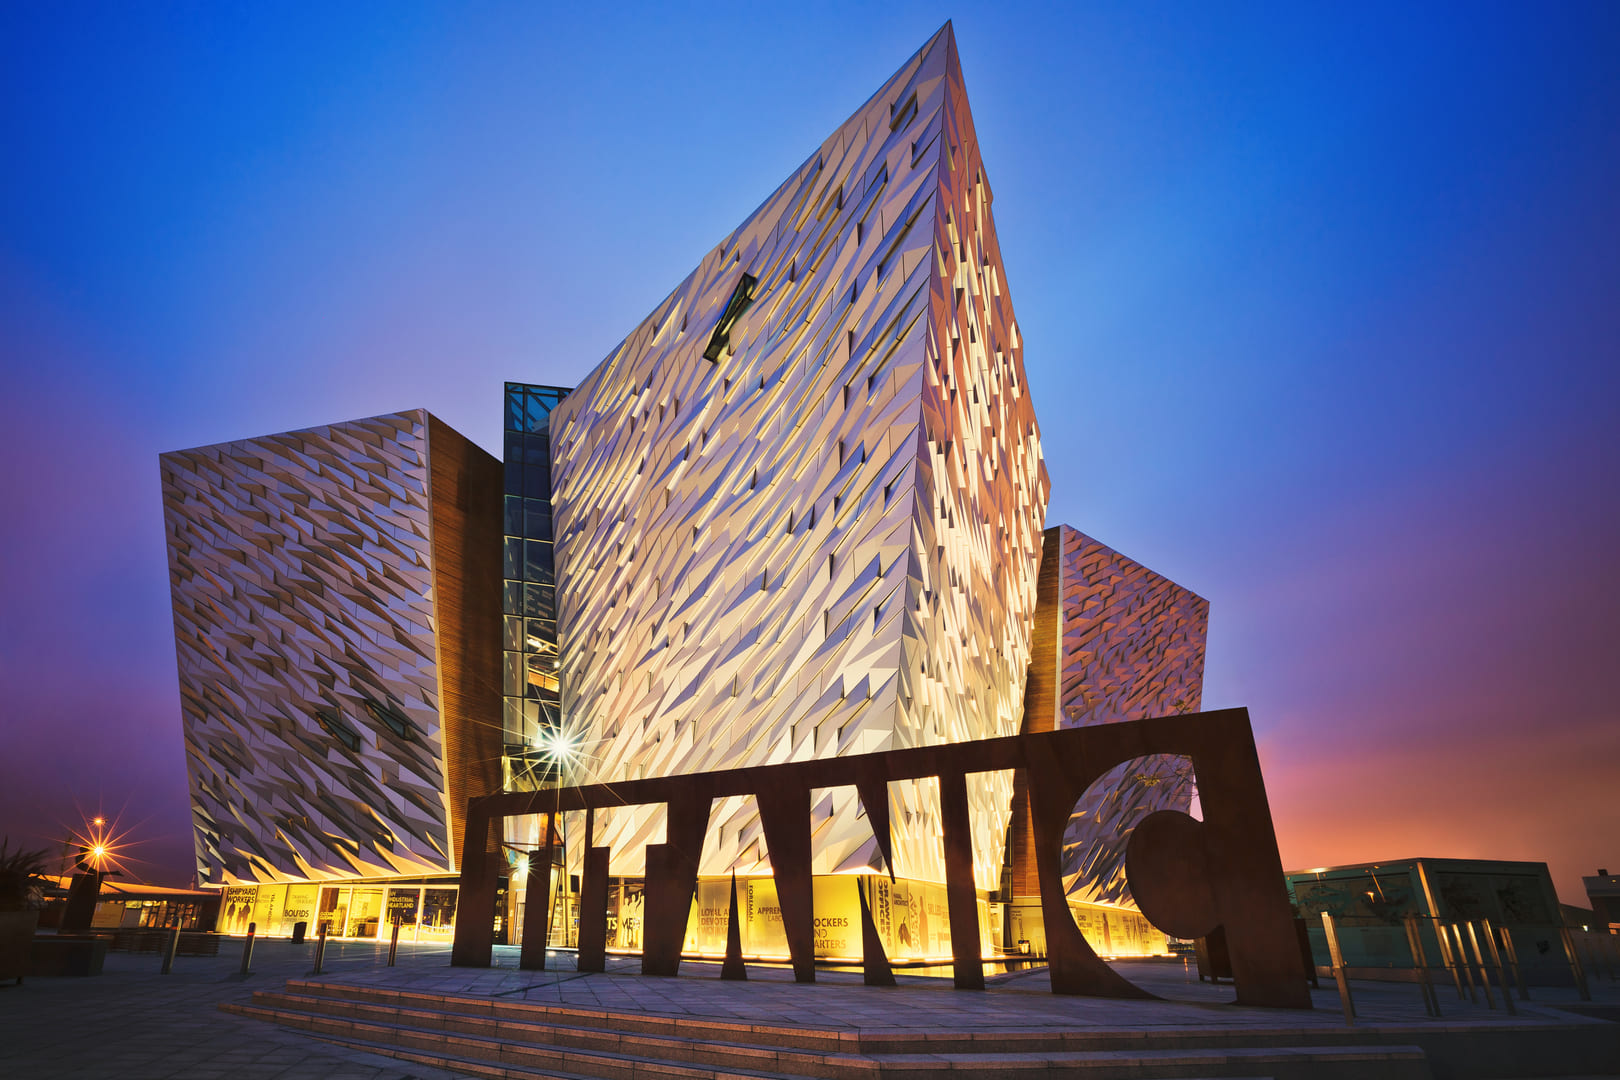 Sunset over Titanic Belfast - museum, touristic attraction and monument to Belfast's maritime heritage on the site of the former Harland and Wolff shipyard.